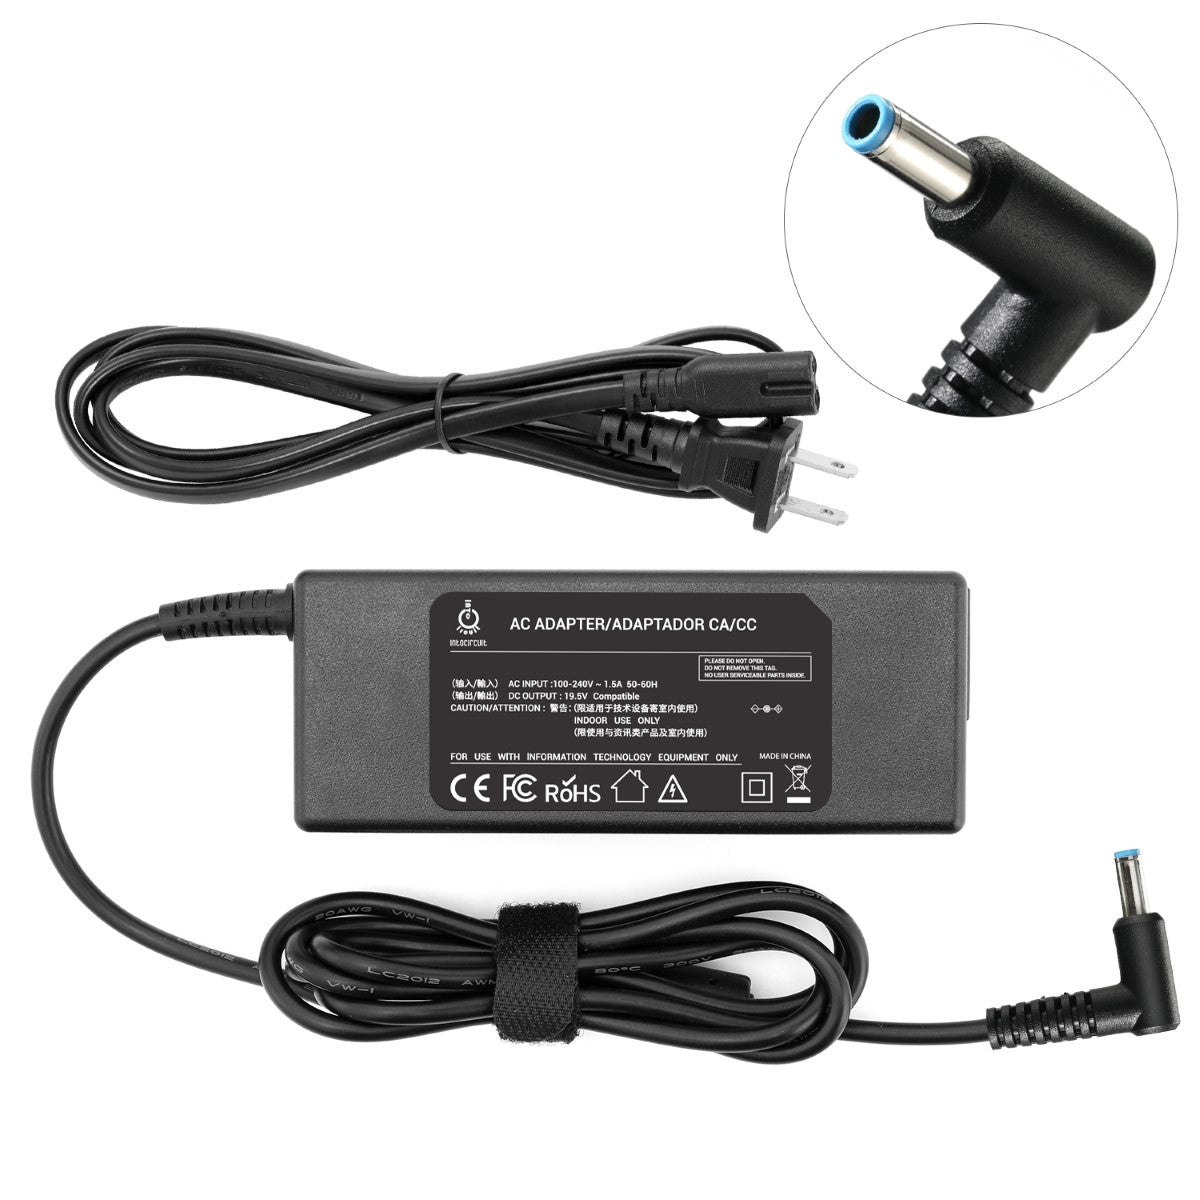 Charger for HP 246 G2 Notebook